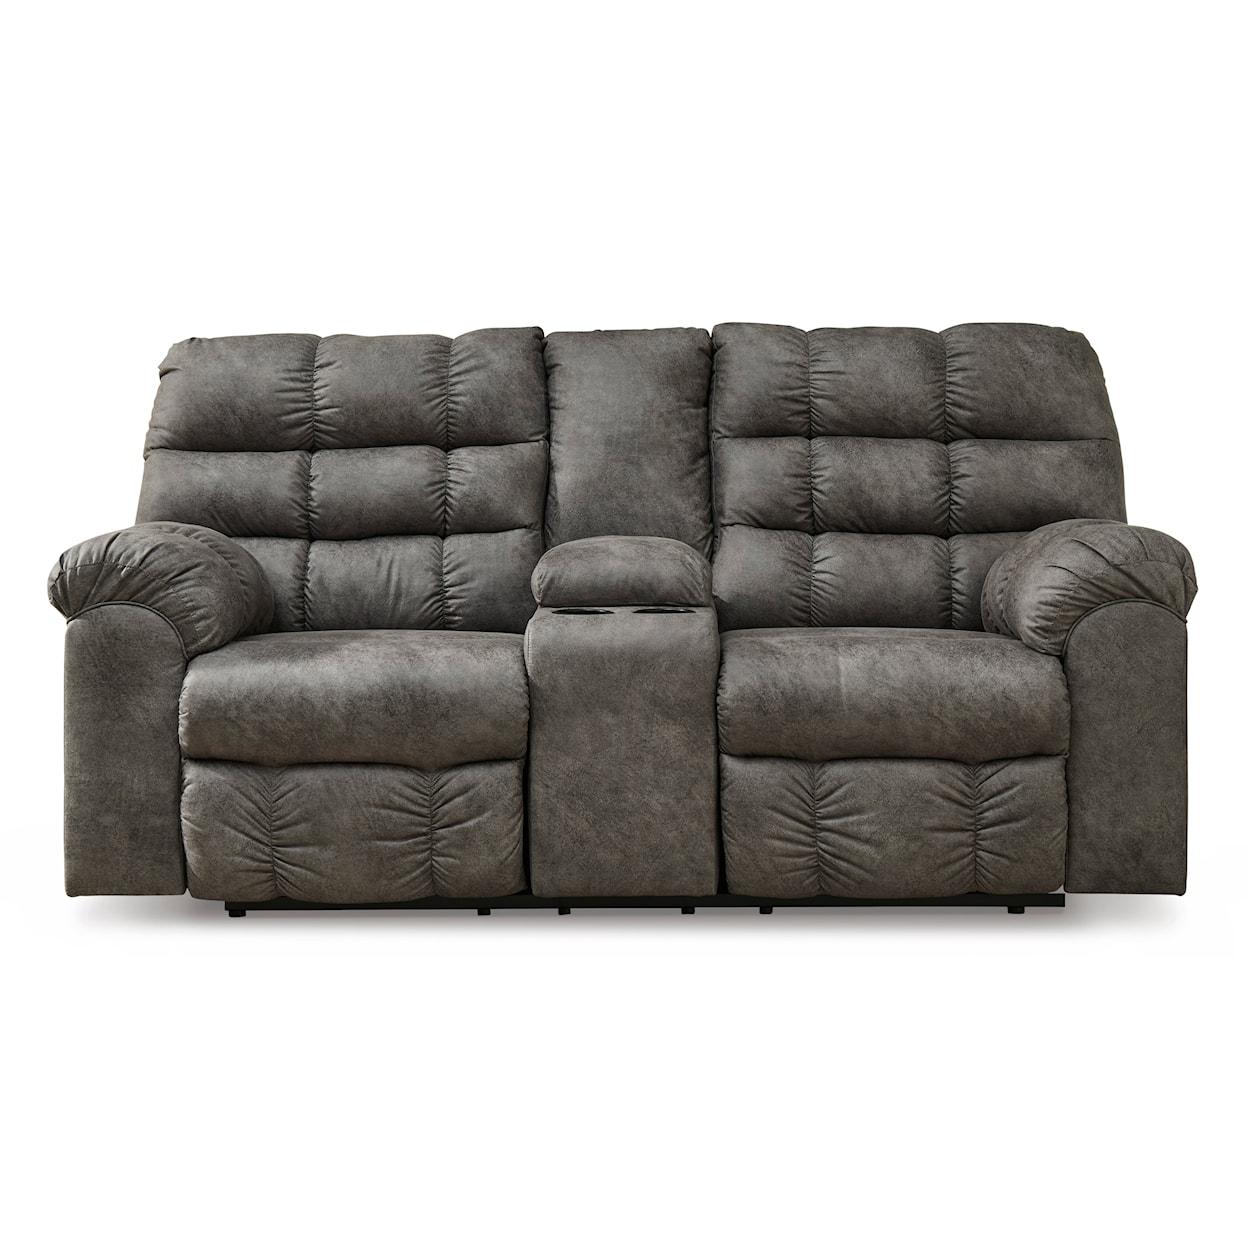 Ashley Furniture Signature Design Derwin Reclining Loveseat with Console